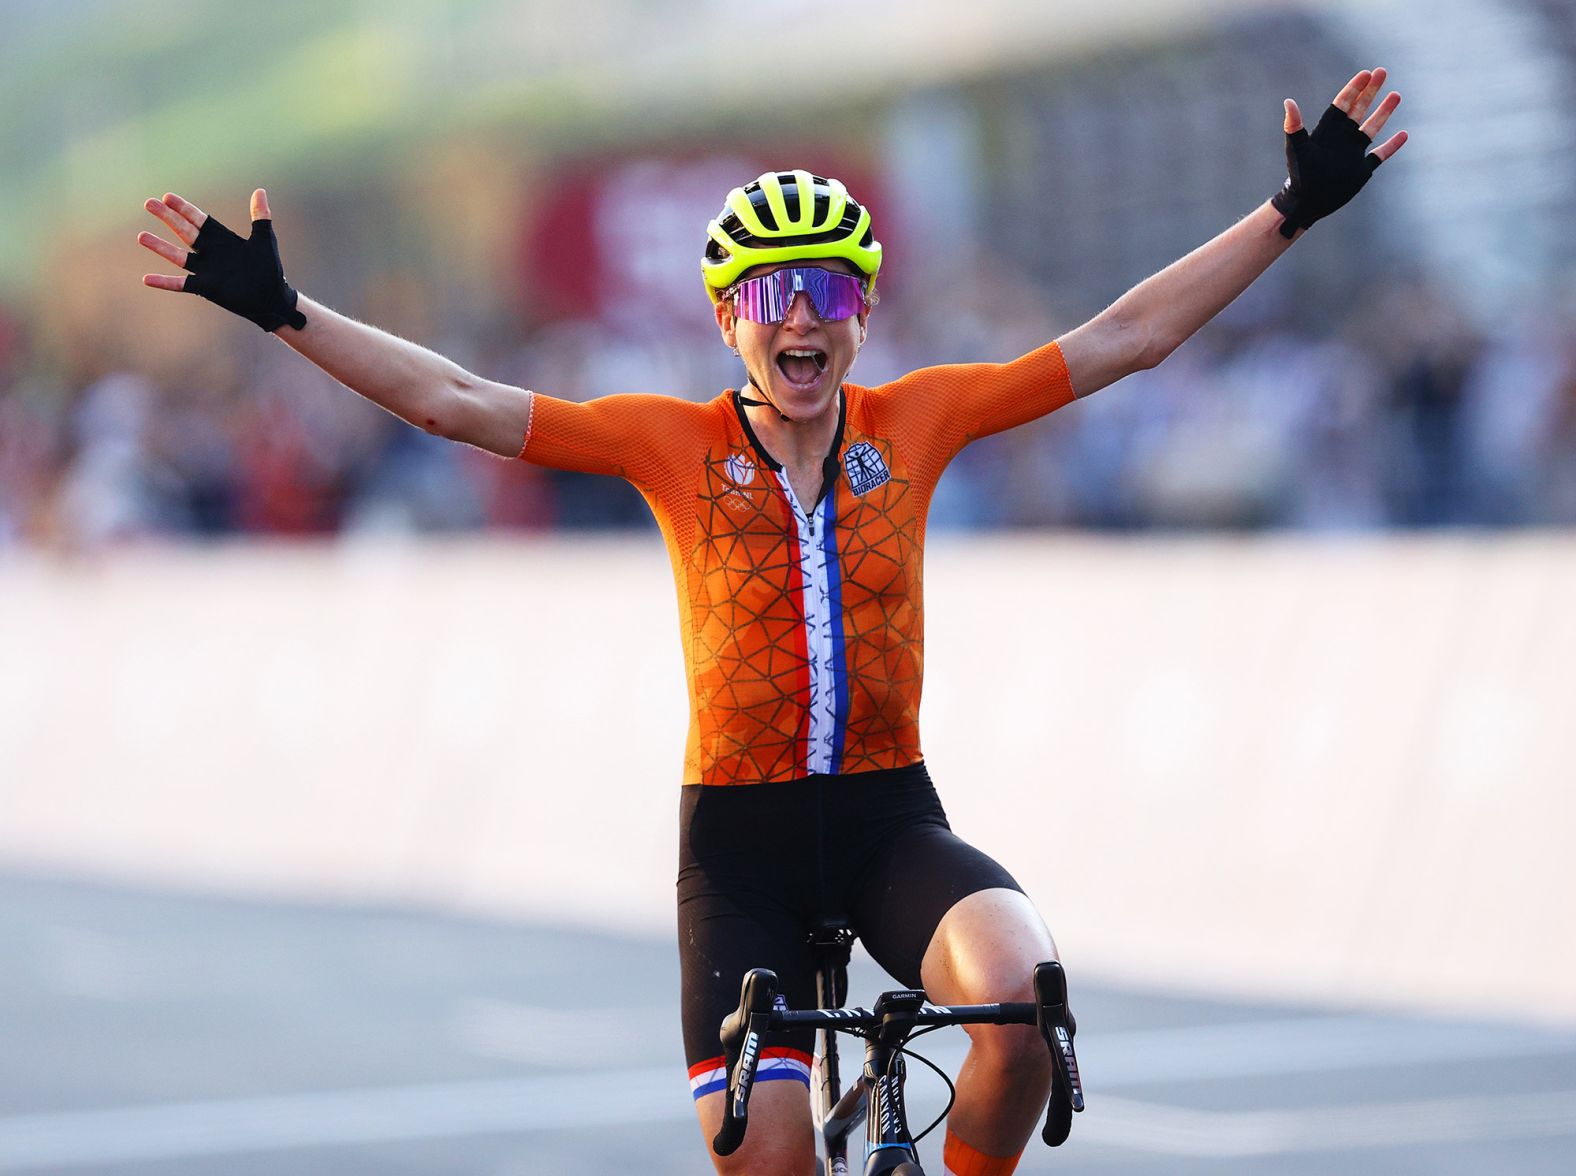 Dutch cyclist Annemiek van Vleuten celebrates after completing the road race on July 25. She <a href="index.php?page=&url=https%3A%2F%2Fwww.cnn.com%2F2021%2F07%2F25%2Fsport%2Fanna-kiesenhofer-annemiek-van-vleuten-tokyo-2020-spt-intl%2Findex.html" target="_blank">thought she had won</a> the gold medal, not realizing that Austria's Anna Kiesenhofer had broken away from the pack and finished first. Cyclists race without earpieces at the Olympics, and that played a part in her confusion, she said. But she was still "really proud" of her silver medal.